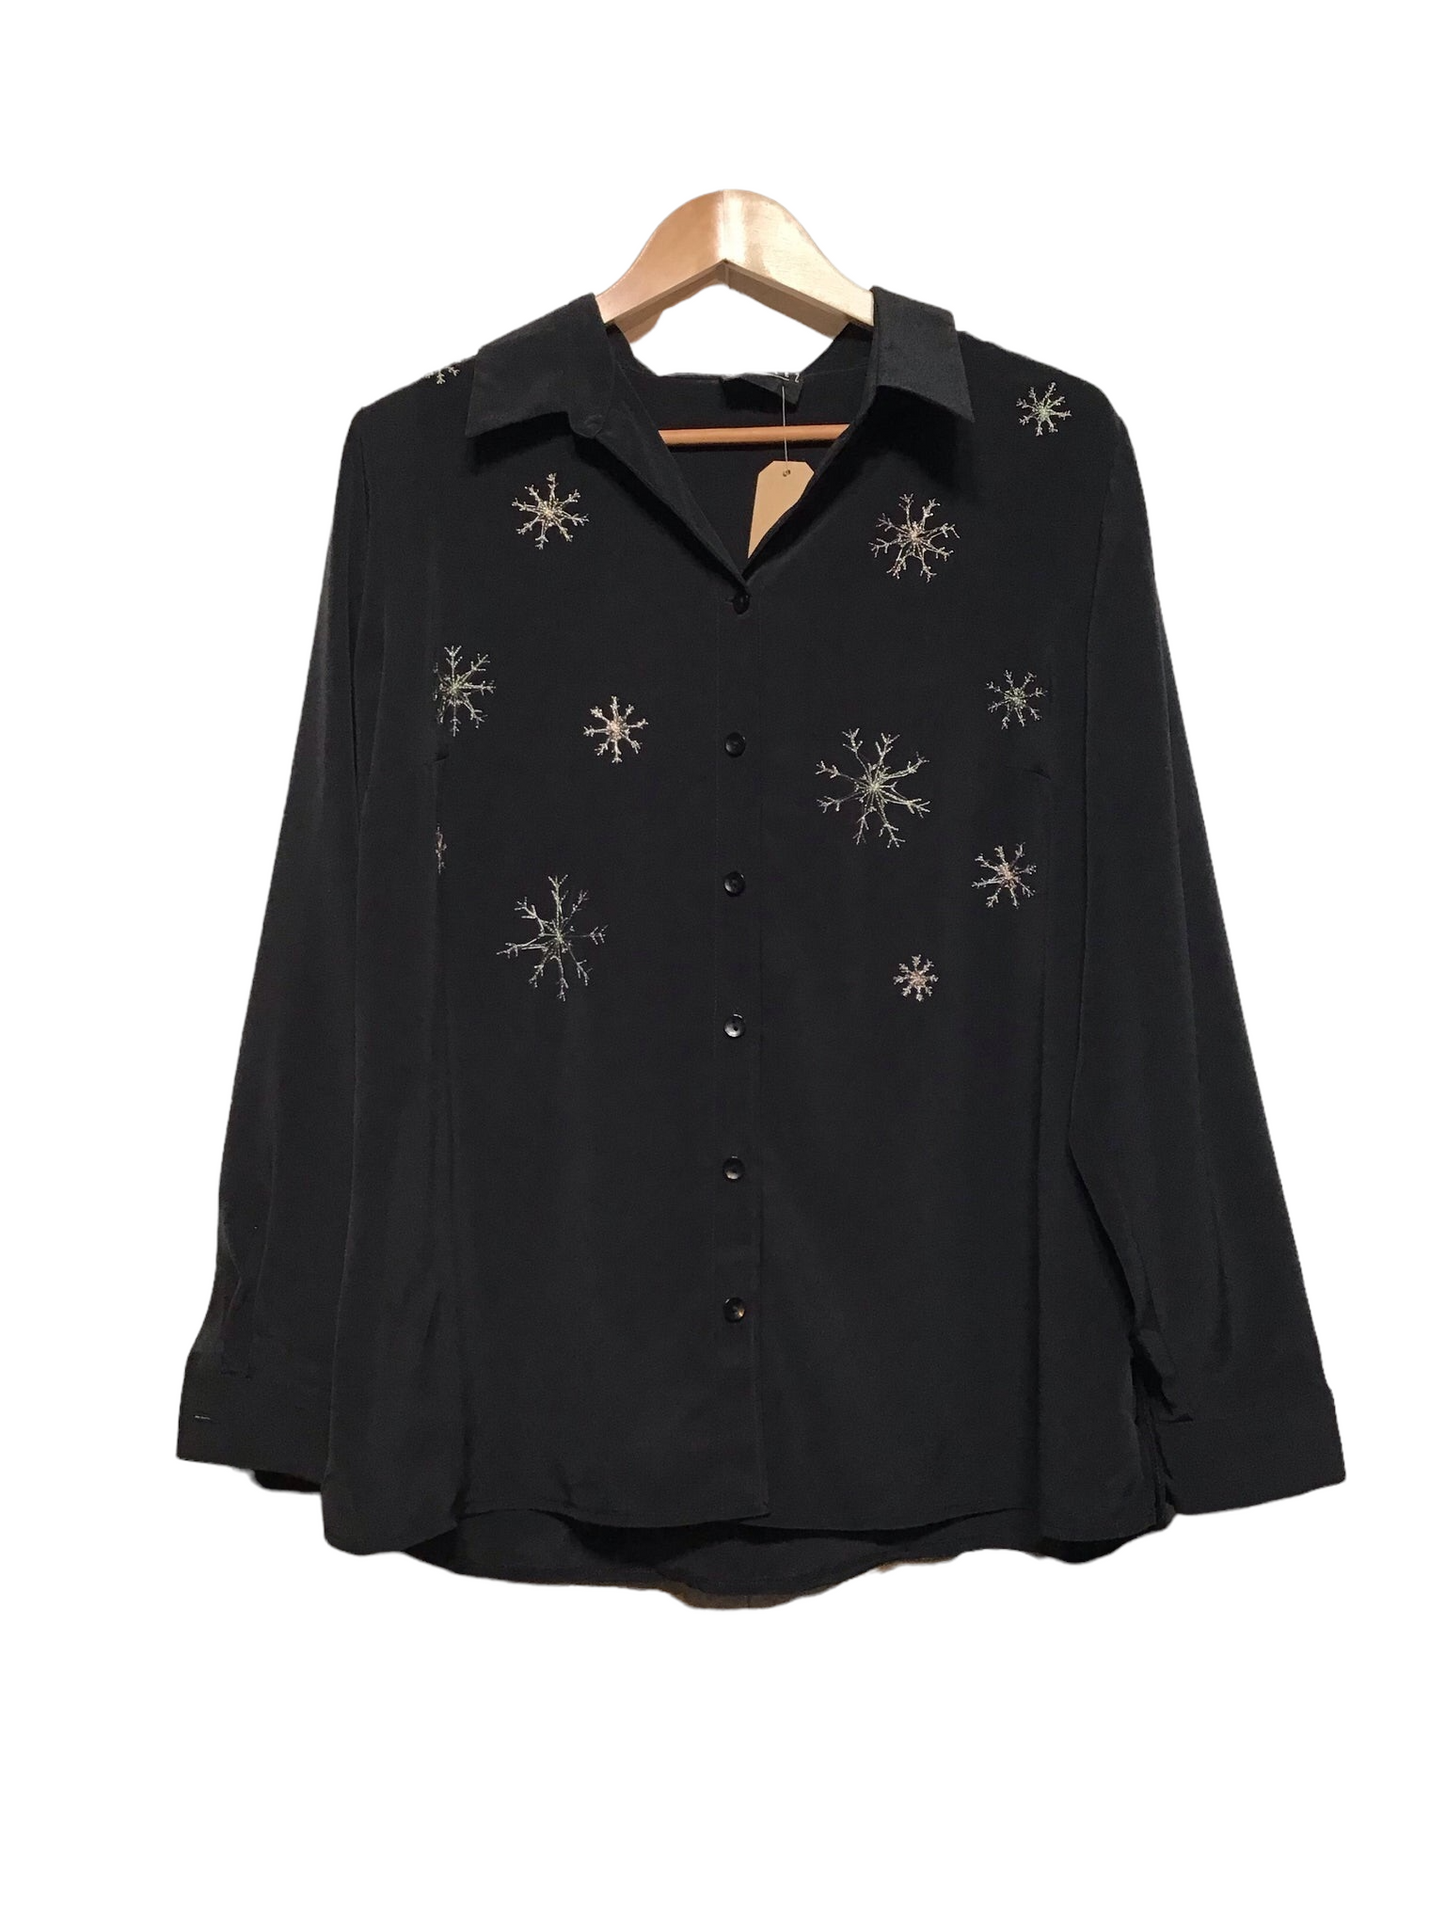 Snowflake Embroidered Blouse (Size L/XL)